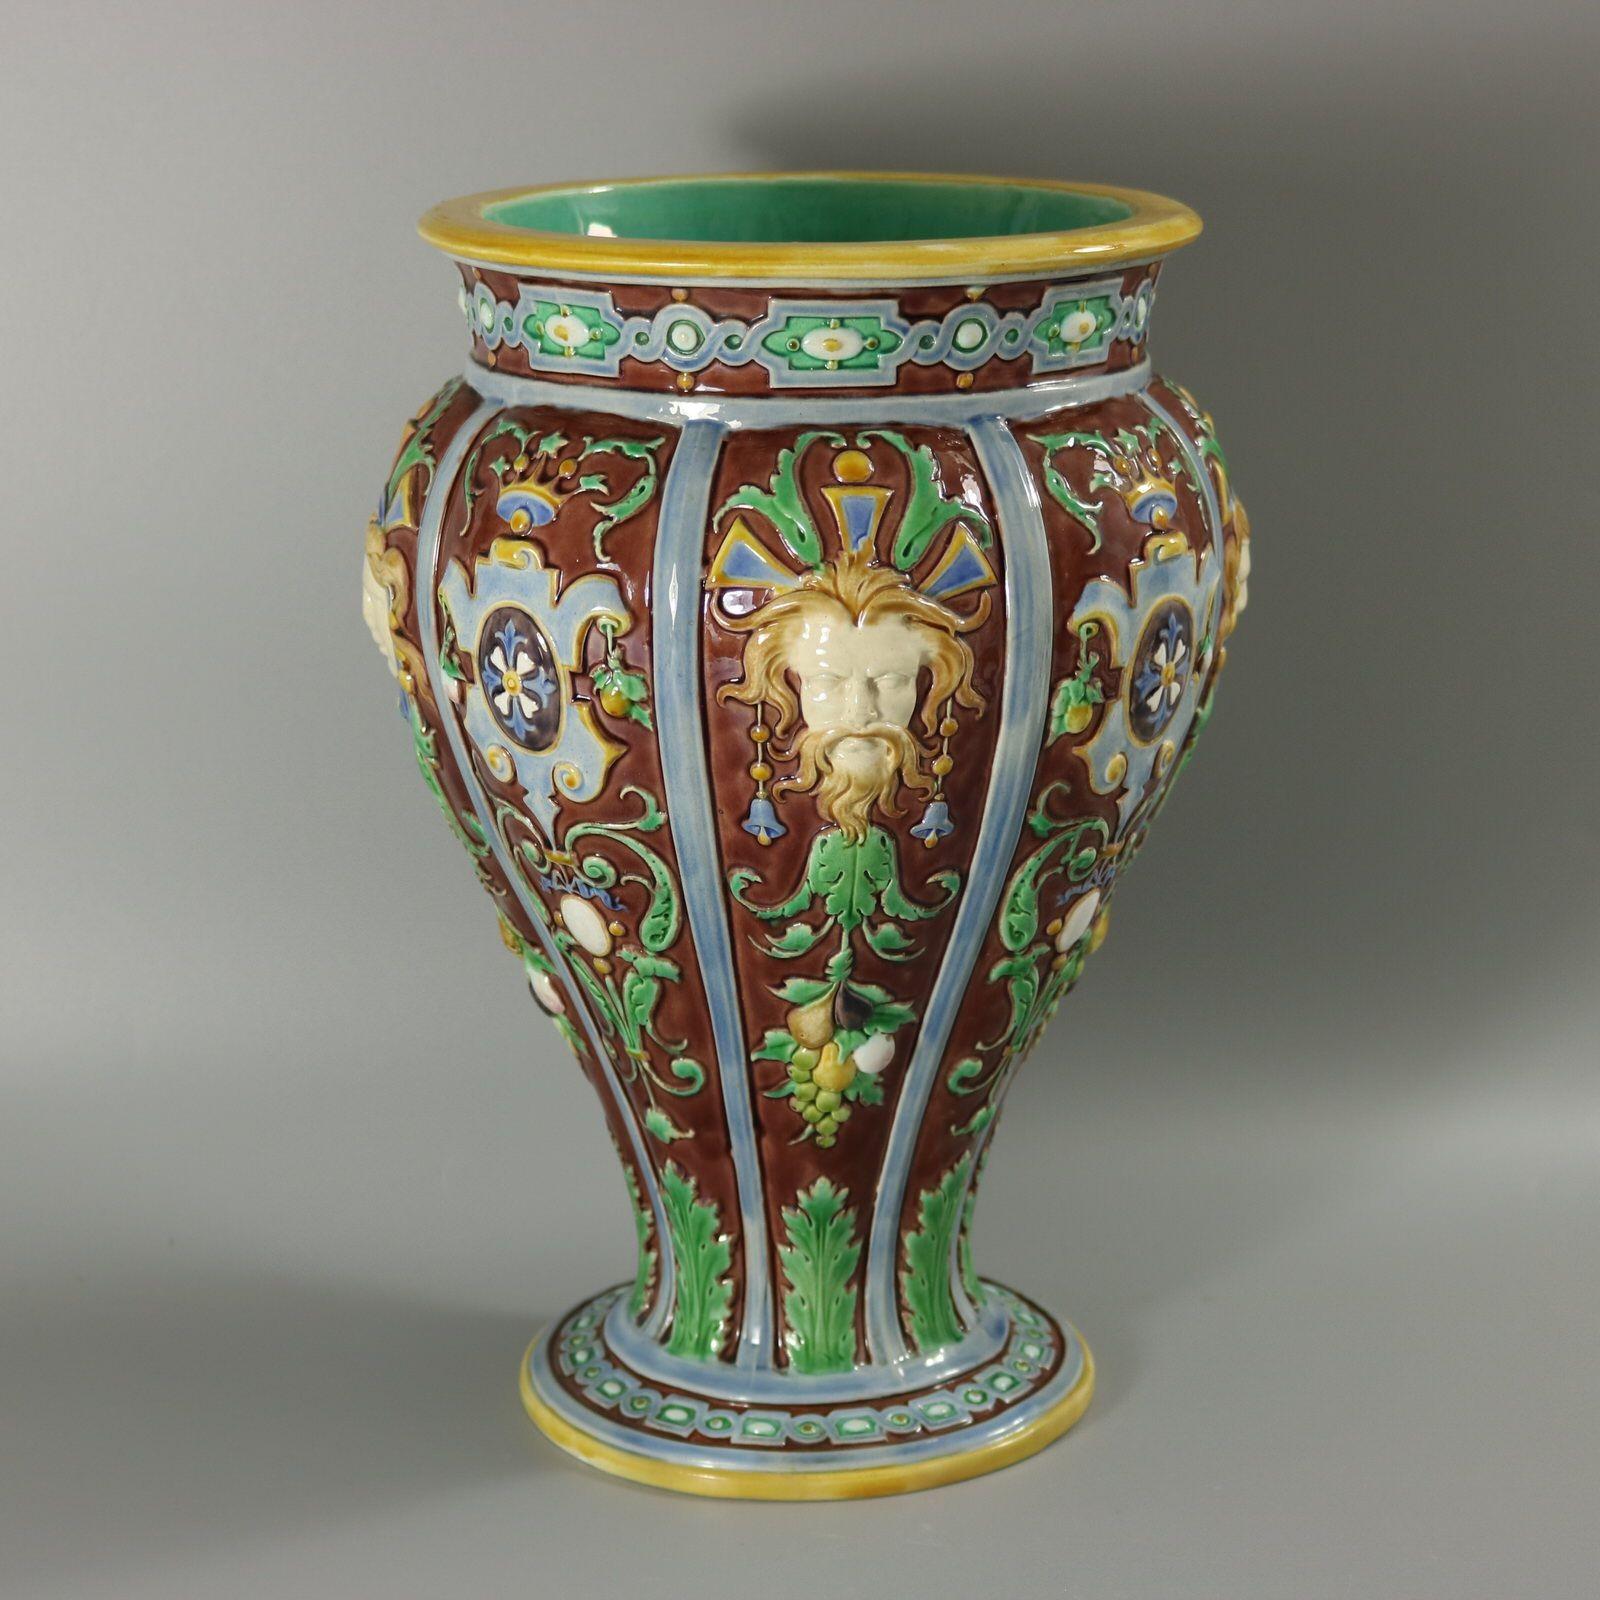 Minton Majolica vase which features male and female masks with hanging leaves and fruit. Cartouche bands in-between. Colouration: brown, green, blue, are predominant. The piece bears maker's marks for the Minton pottery. Bears a pattern number,